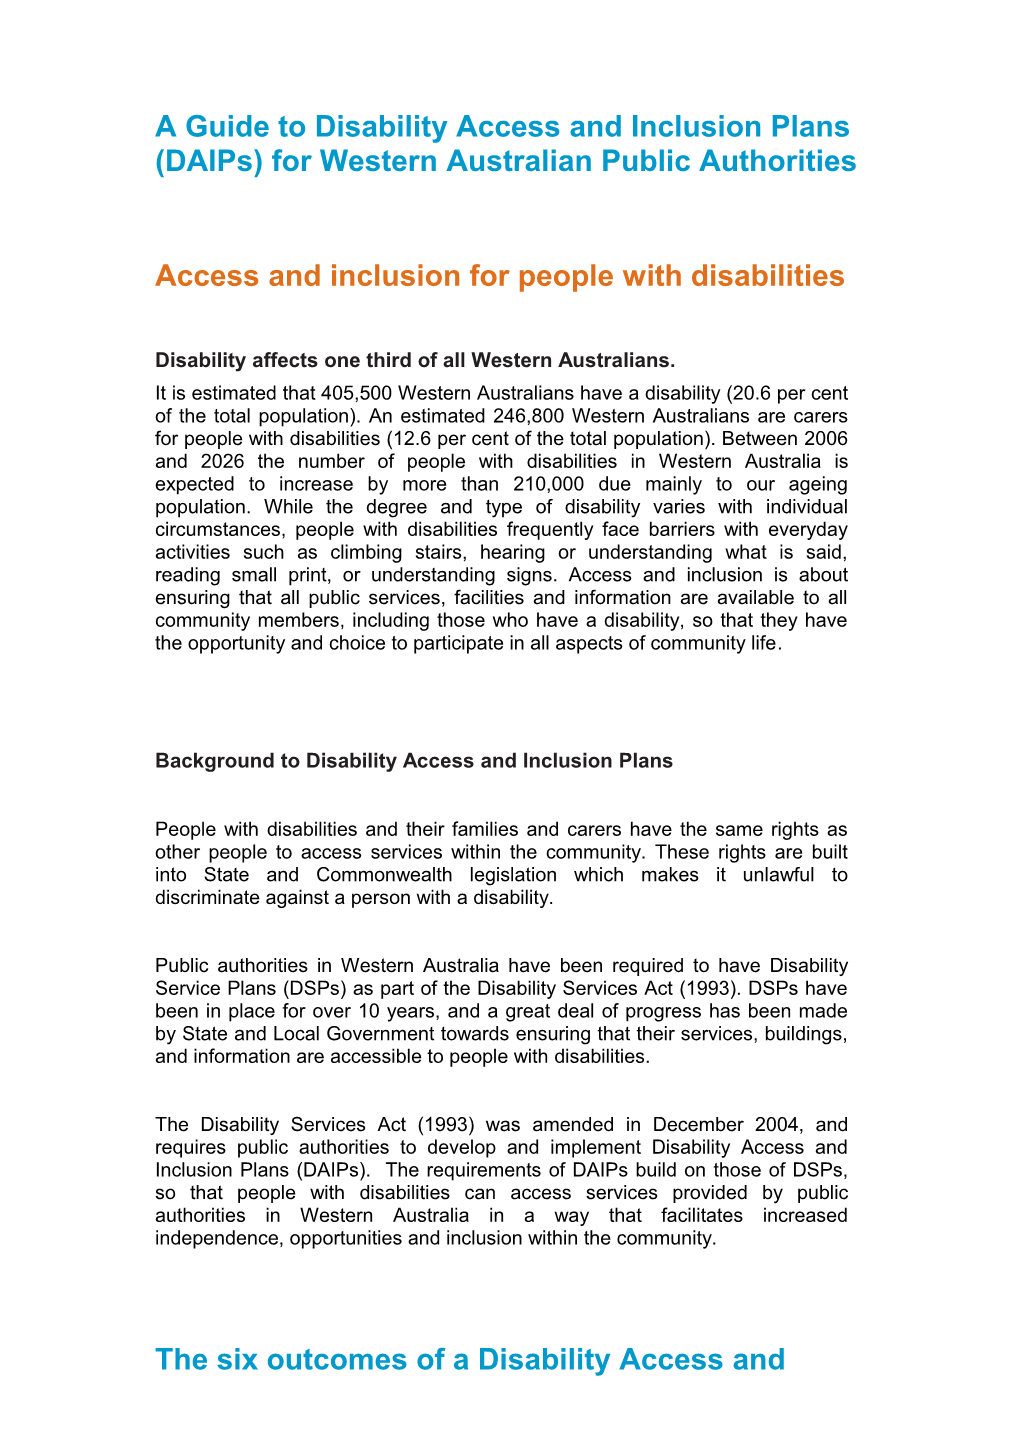 A Guide to Disability Access and Inclusion Plans (Daips)